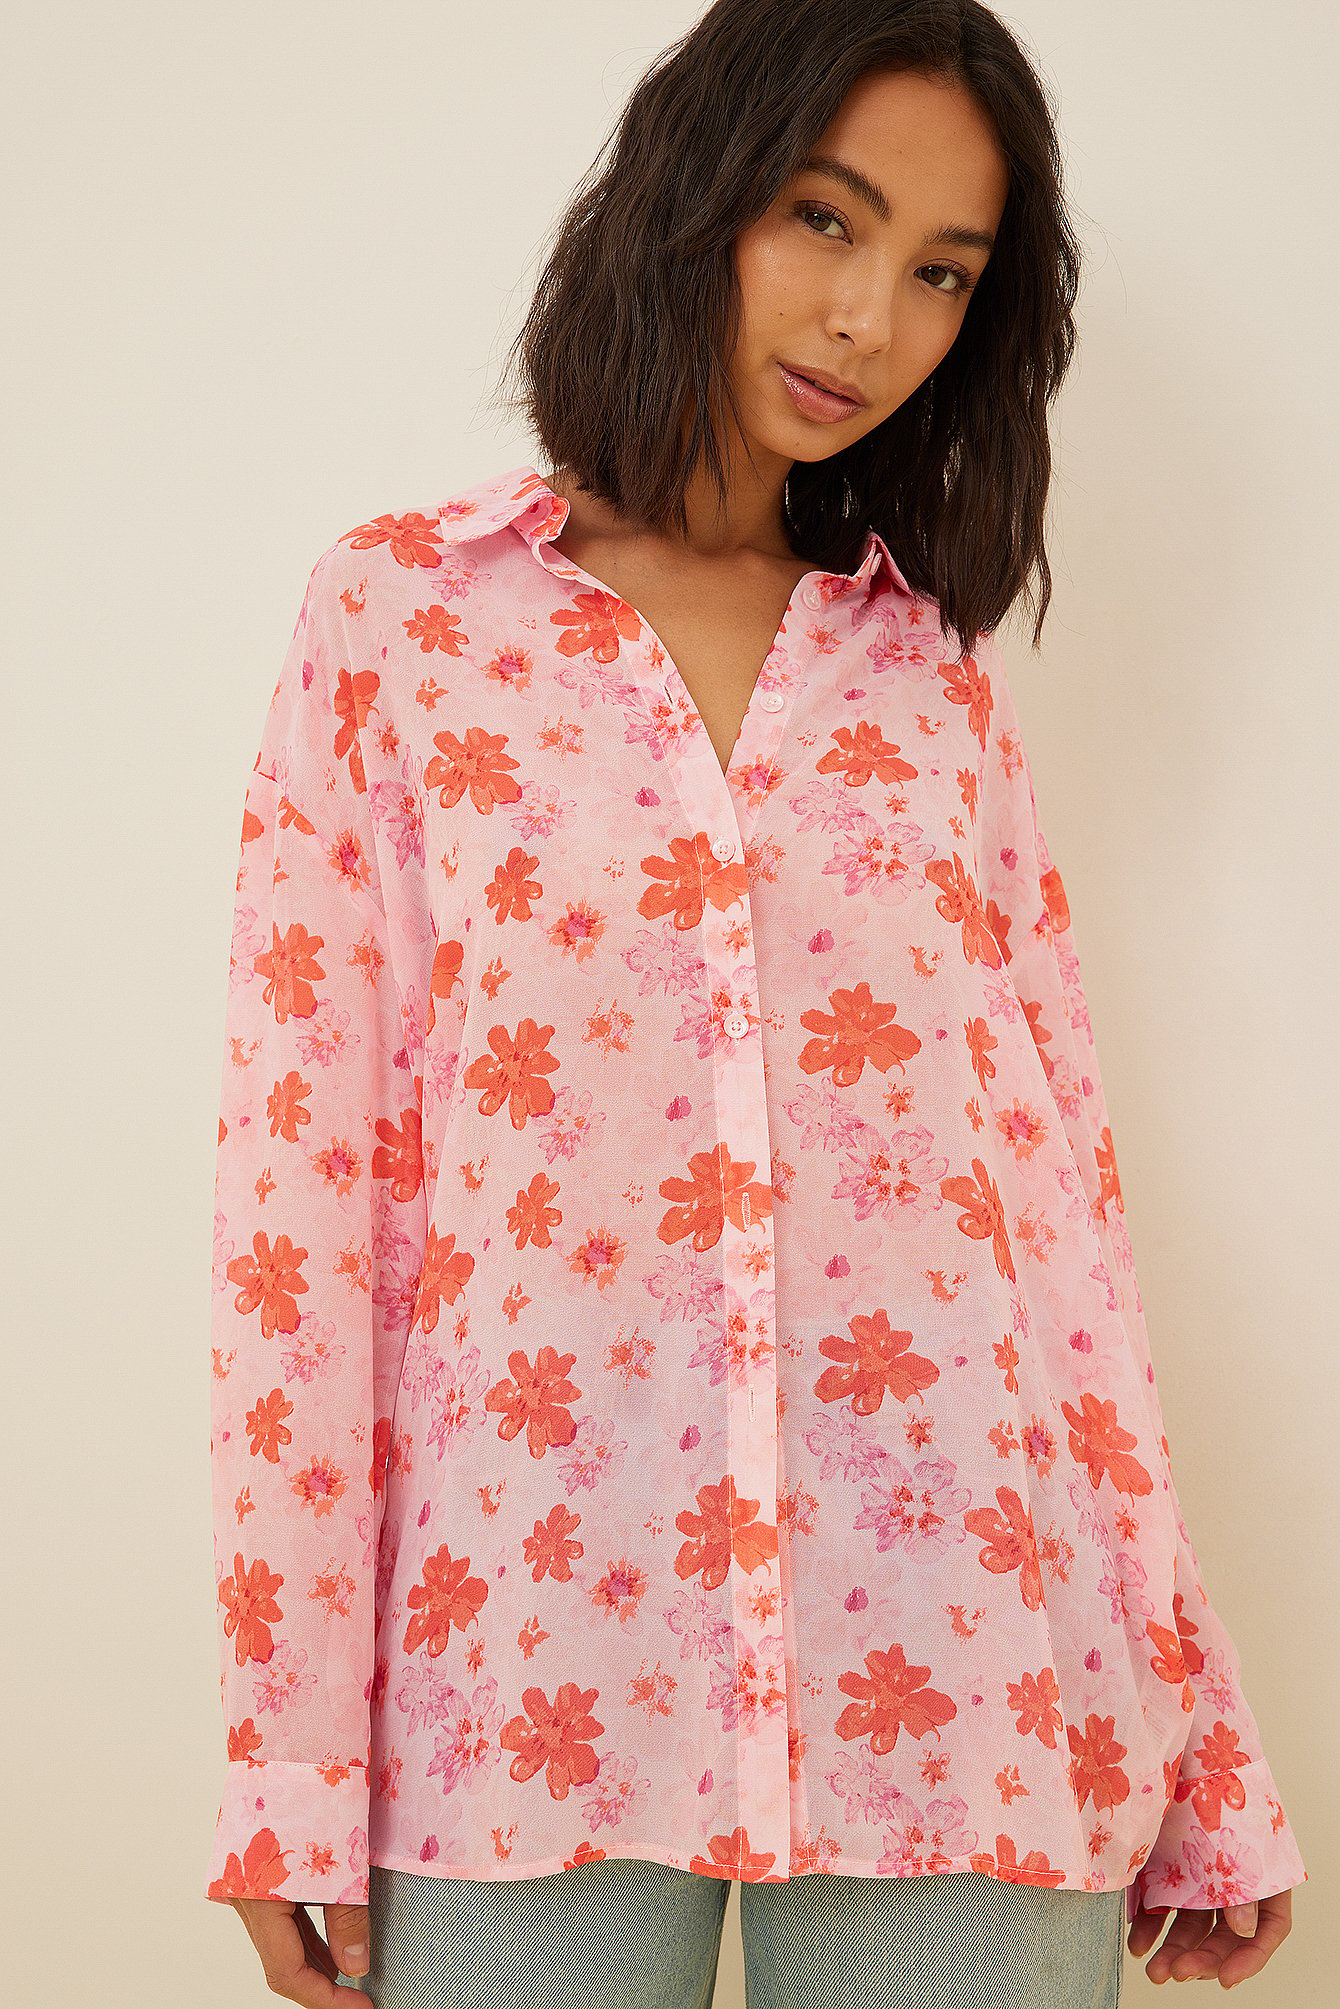 Misslisibell x NA-KD Recycled Oversized Printed Chiffon Shirt - Pink,Flower